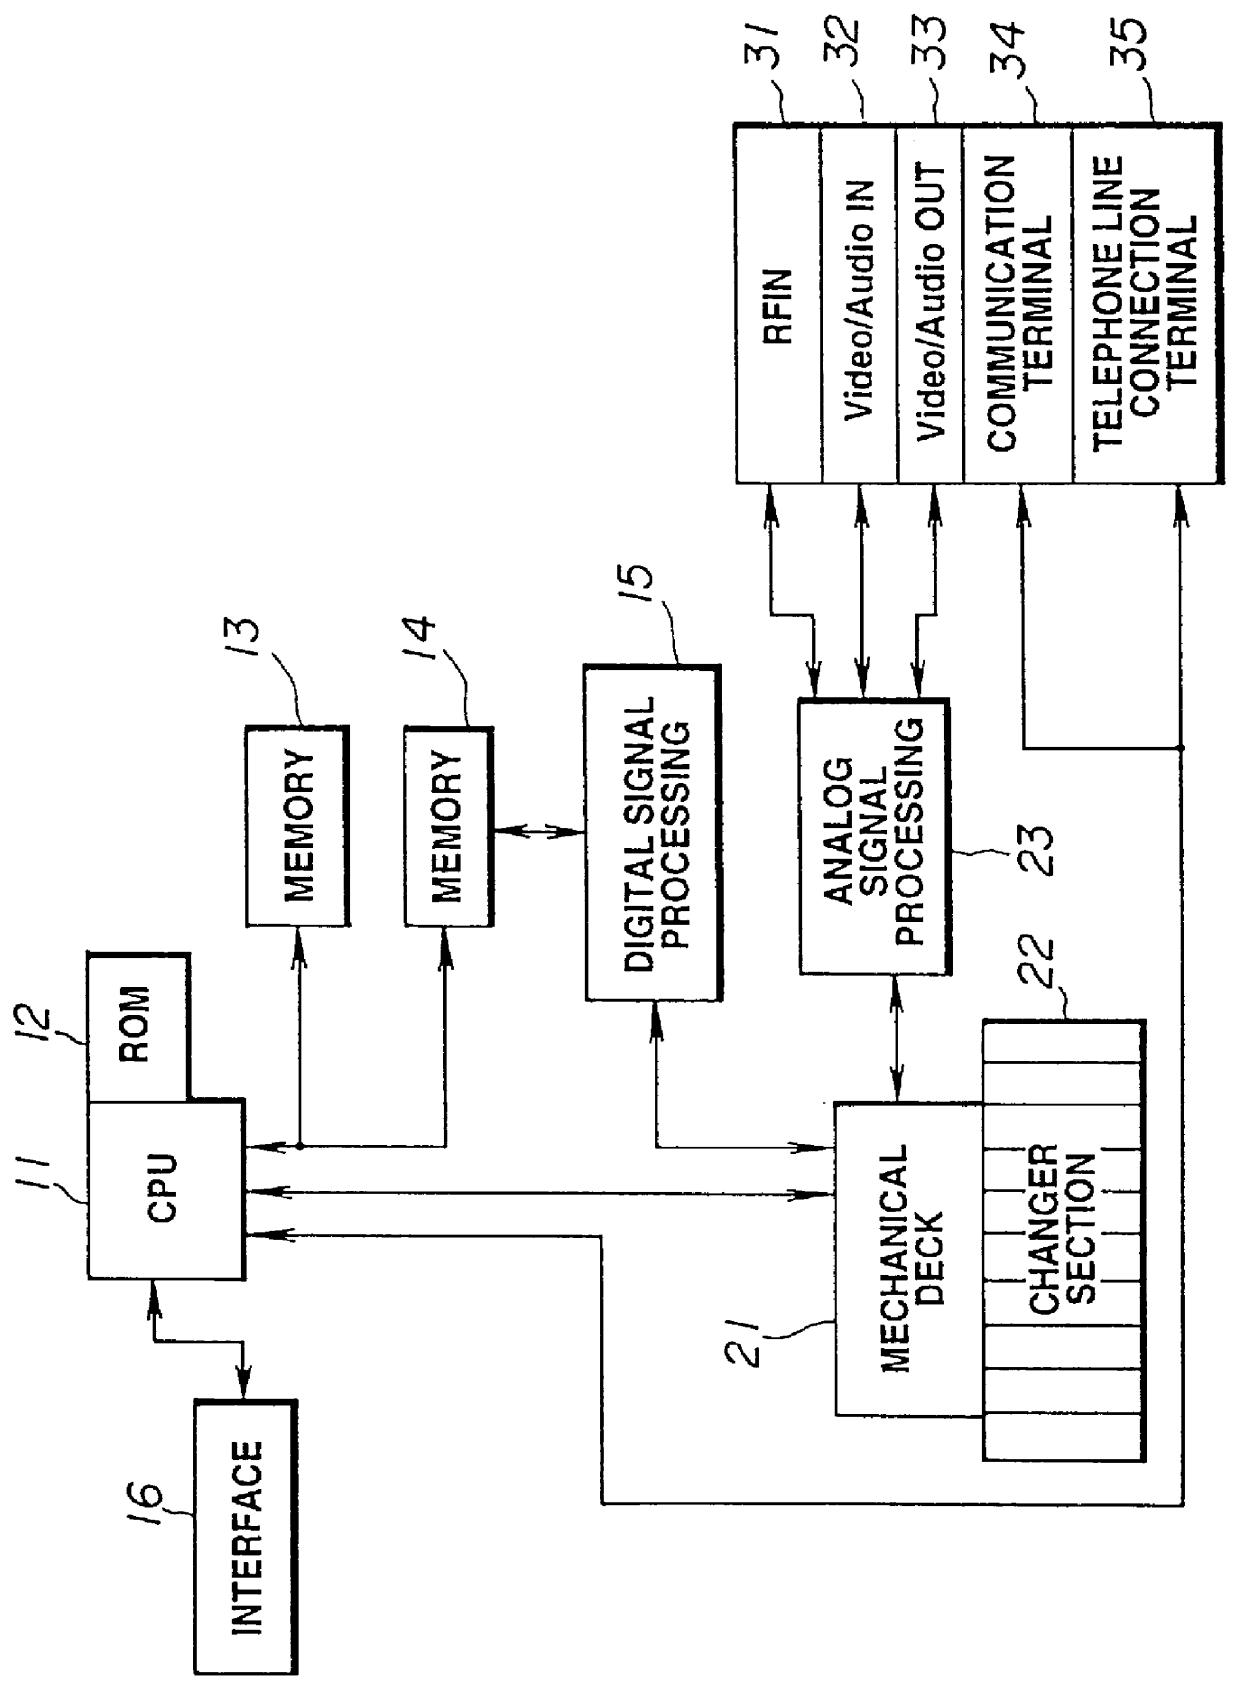 Video recording apparatus with indexing of recording media